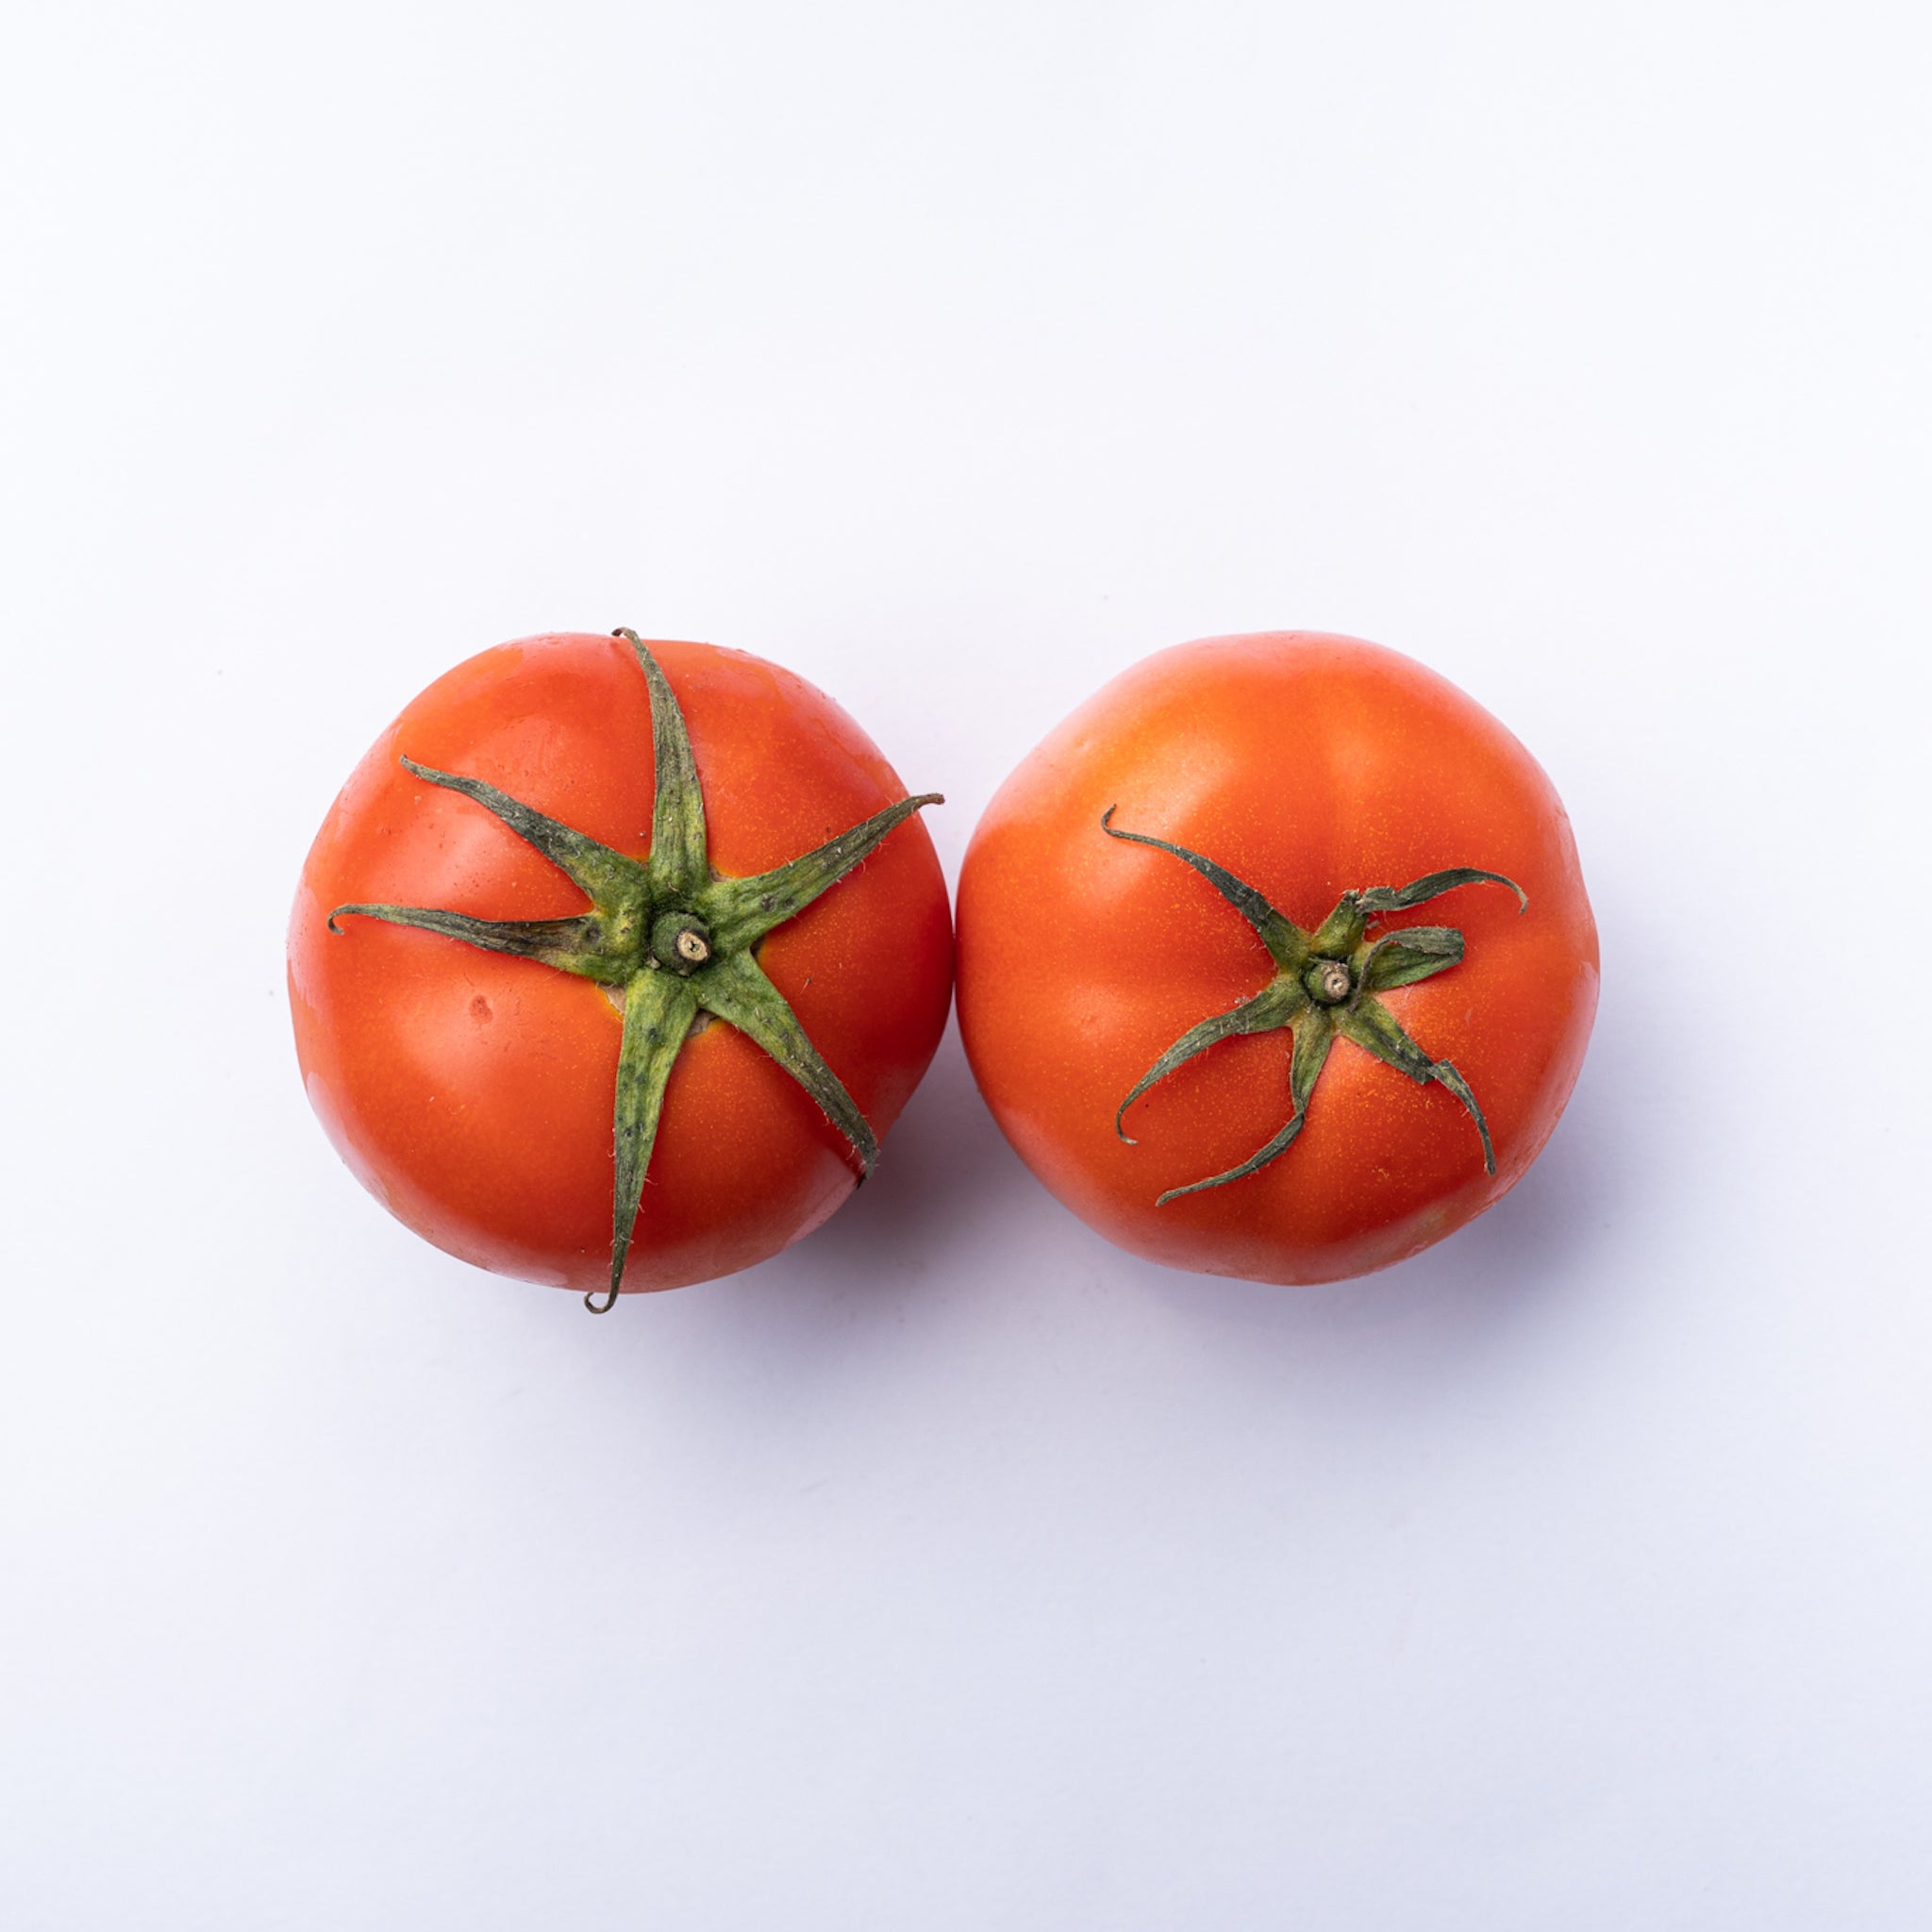 Two red tomatoes with green tops.